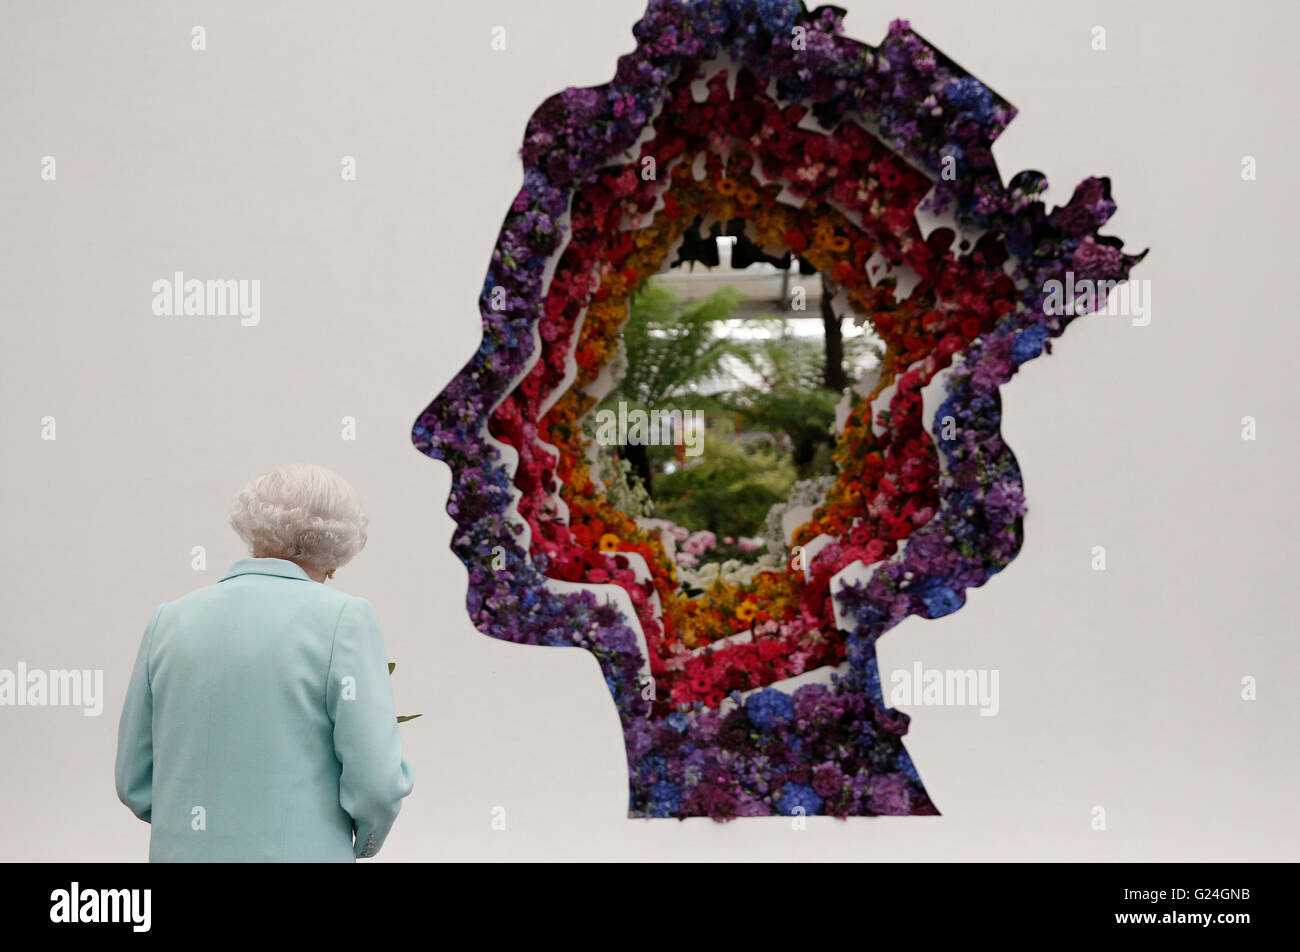 Queen Elizabeth II looks at a floral exhibit by the New Covent Garden Flower Market, which features an image of the Queen, during a visit to the RHS Chelsea Flower Show, at the Royal Hospital Chelsea, London. Stock Photo